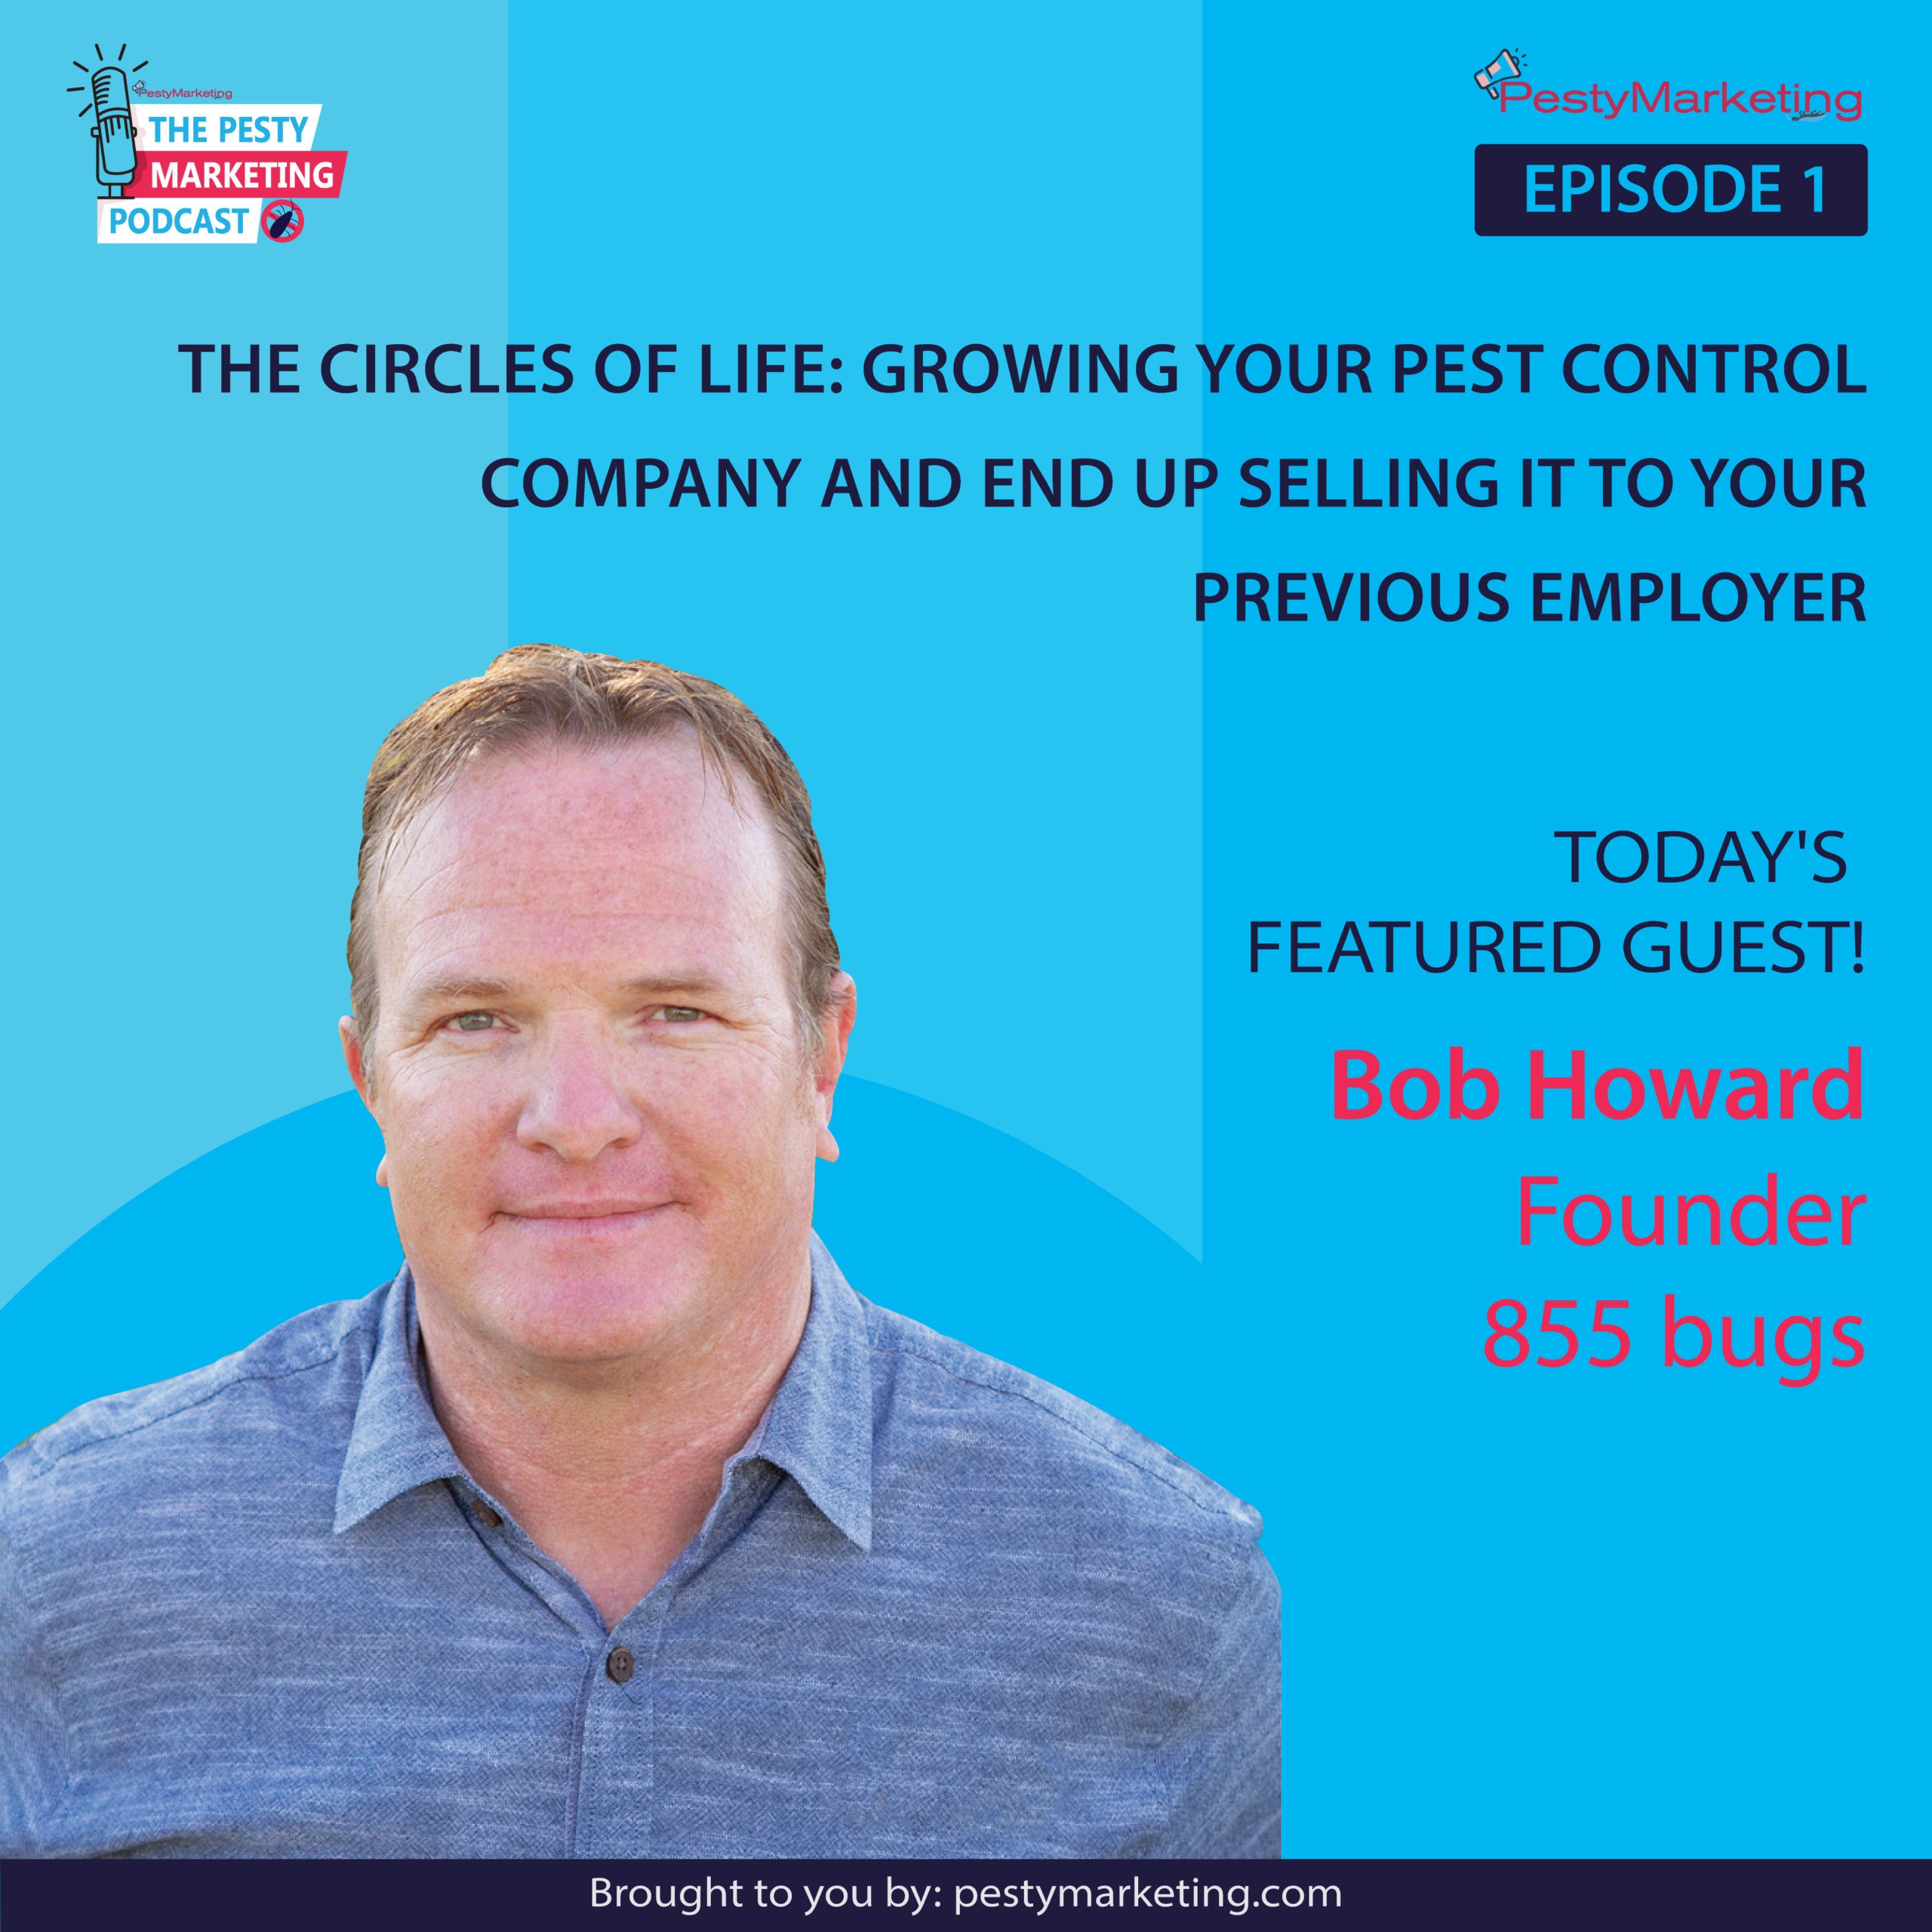 The circles of life: growing your pest control company to end up selling it to your previous employer (with Bob Howard)